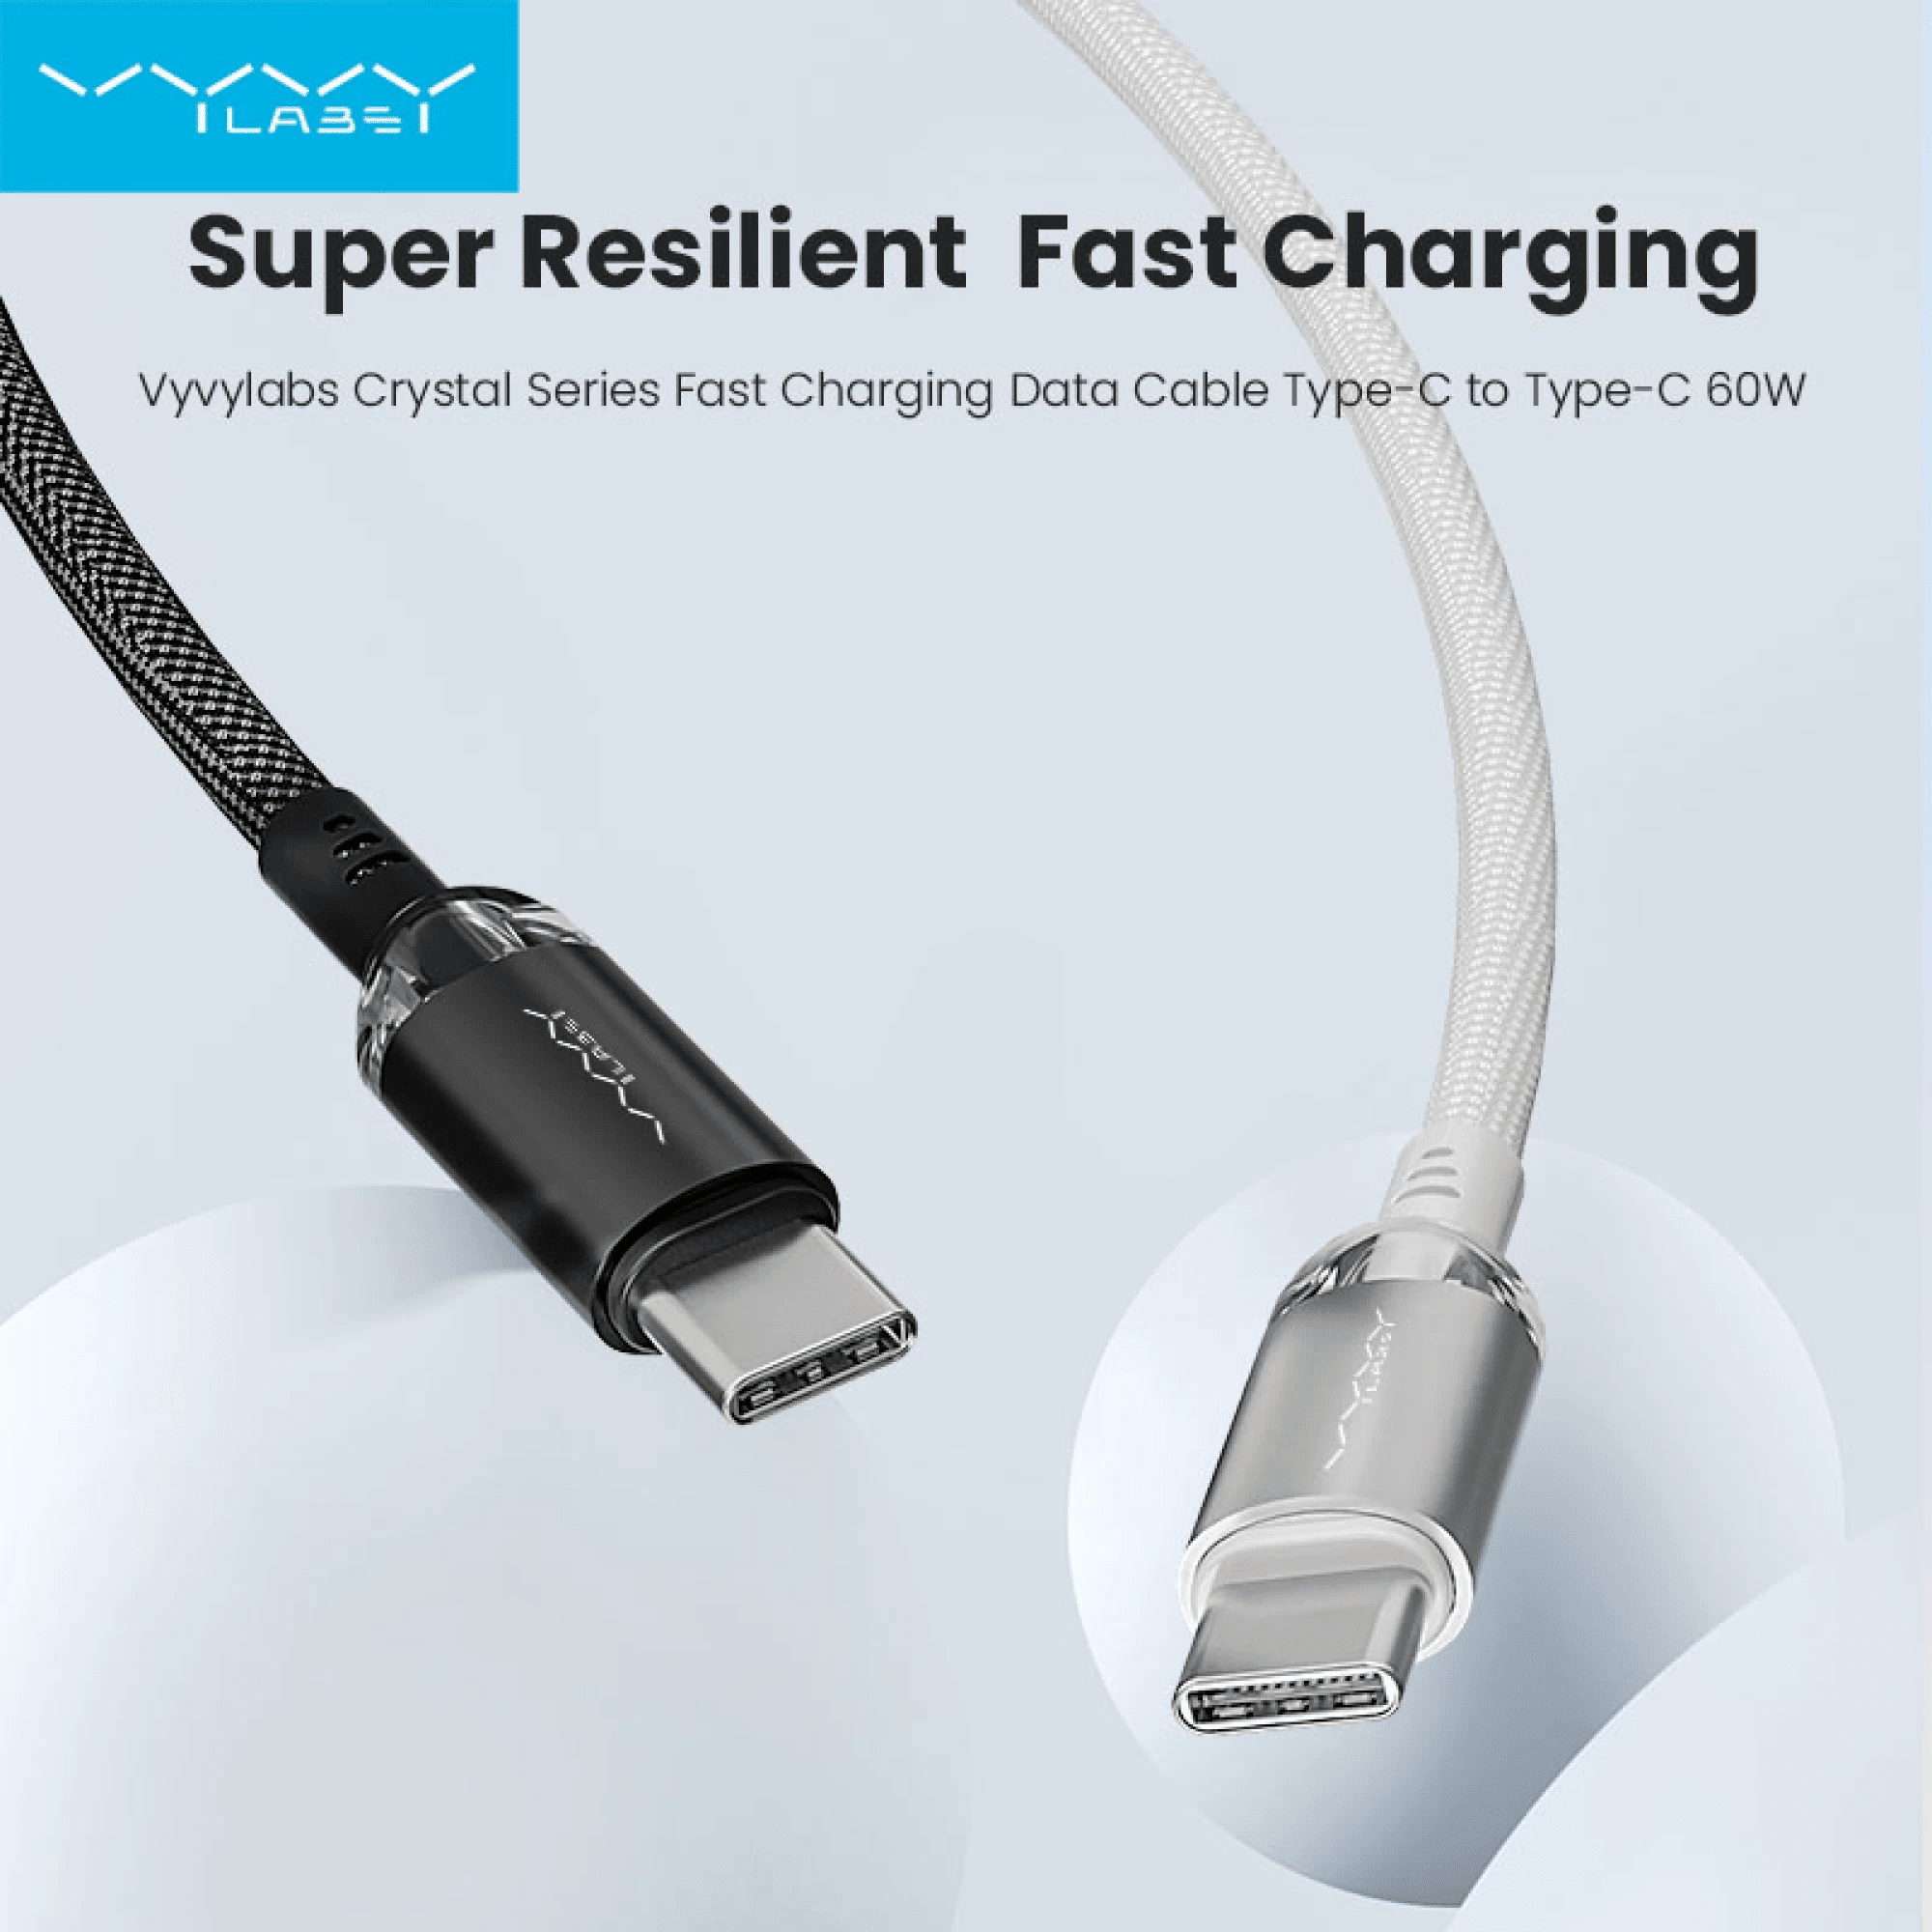 VYVYLABS VCSCC 02 Crystal Series 60W Type C to Type C Fast Charging Data Cable 1 Meter 2